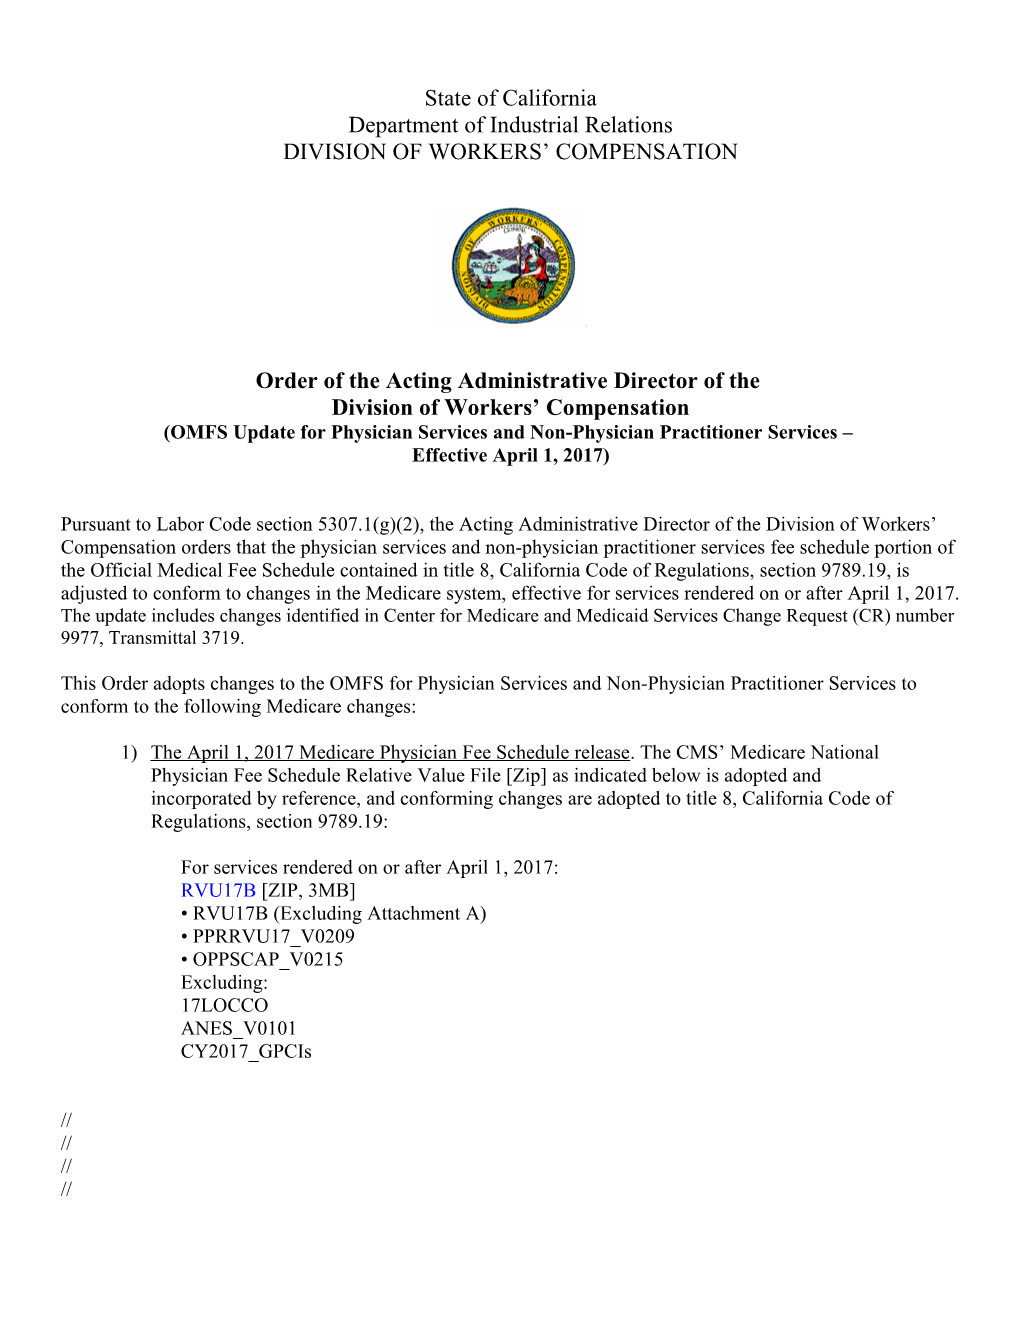 Order of the Acting Administrative Director of The s2